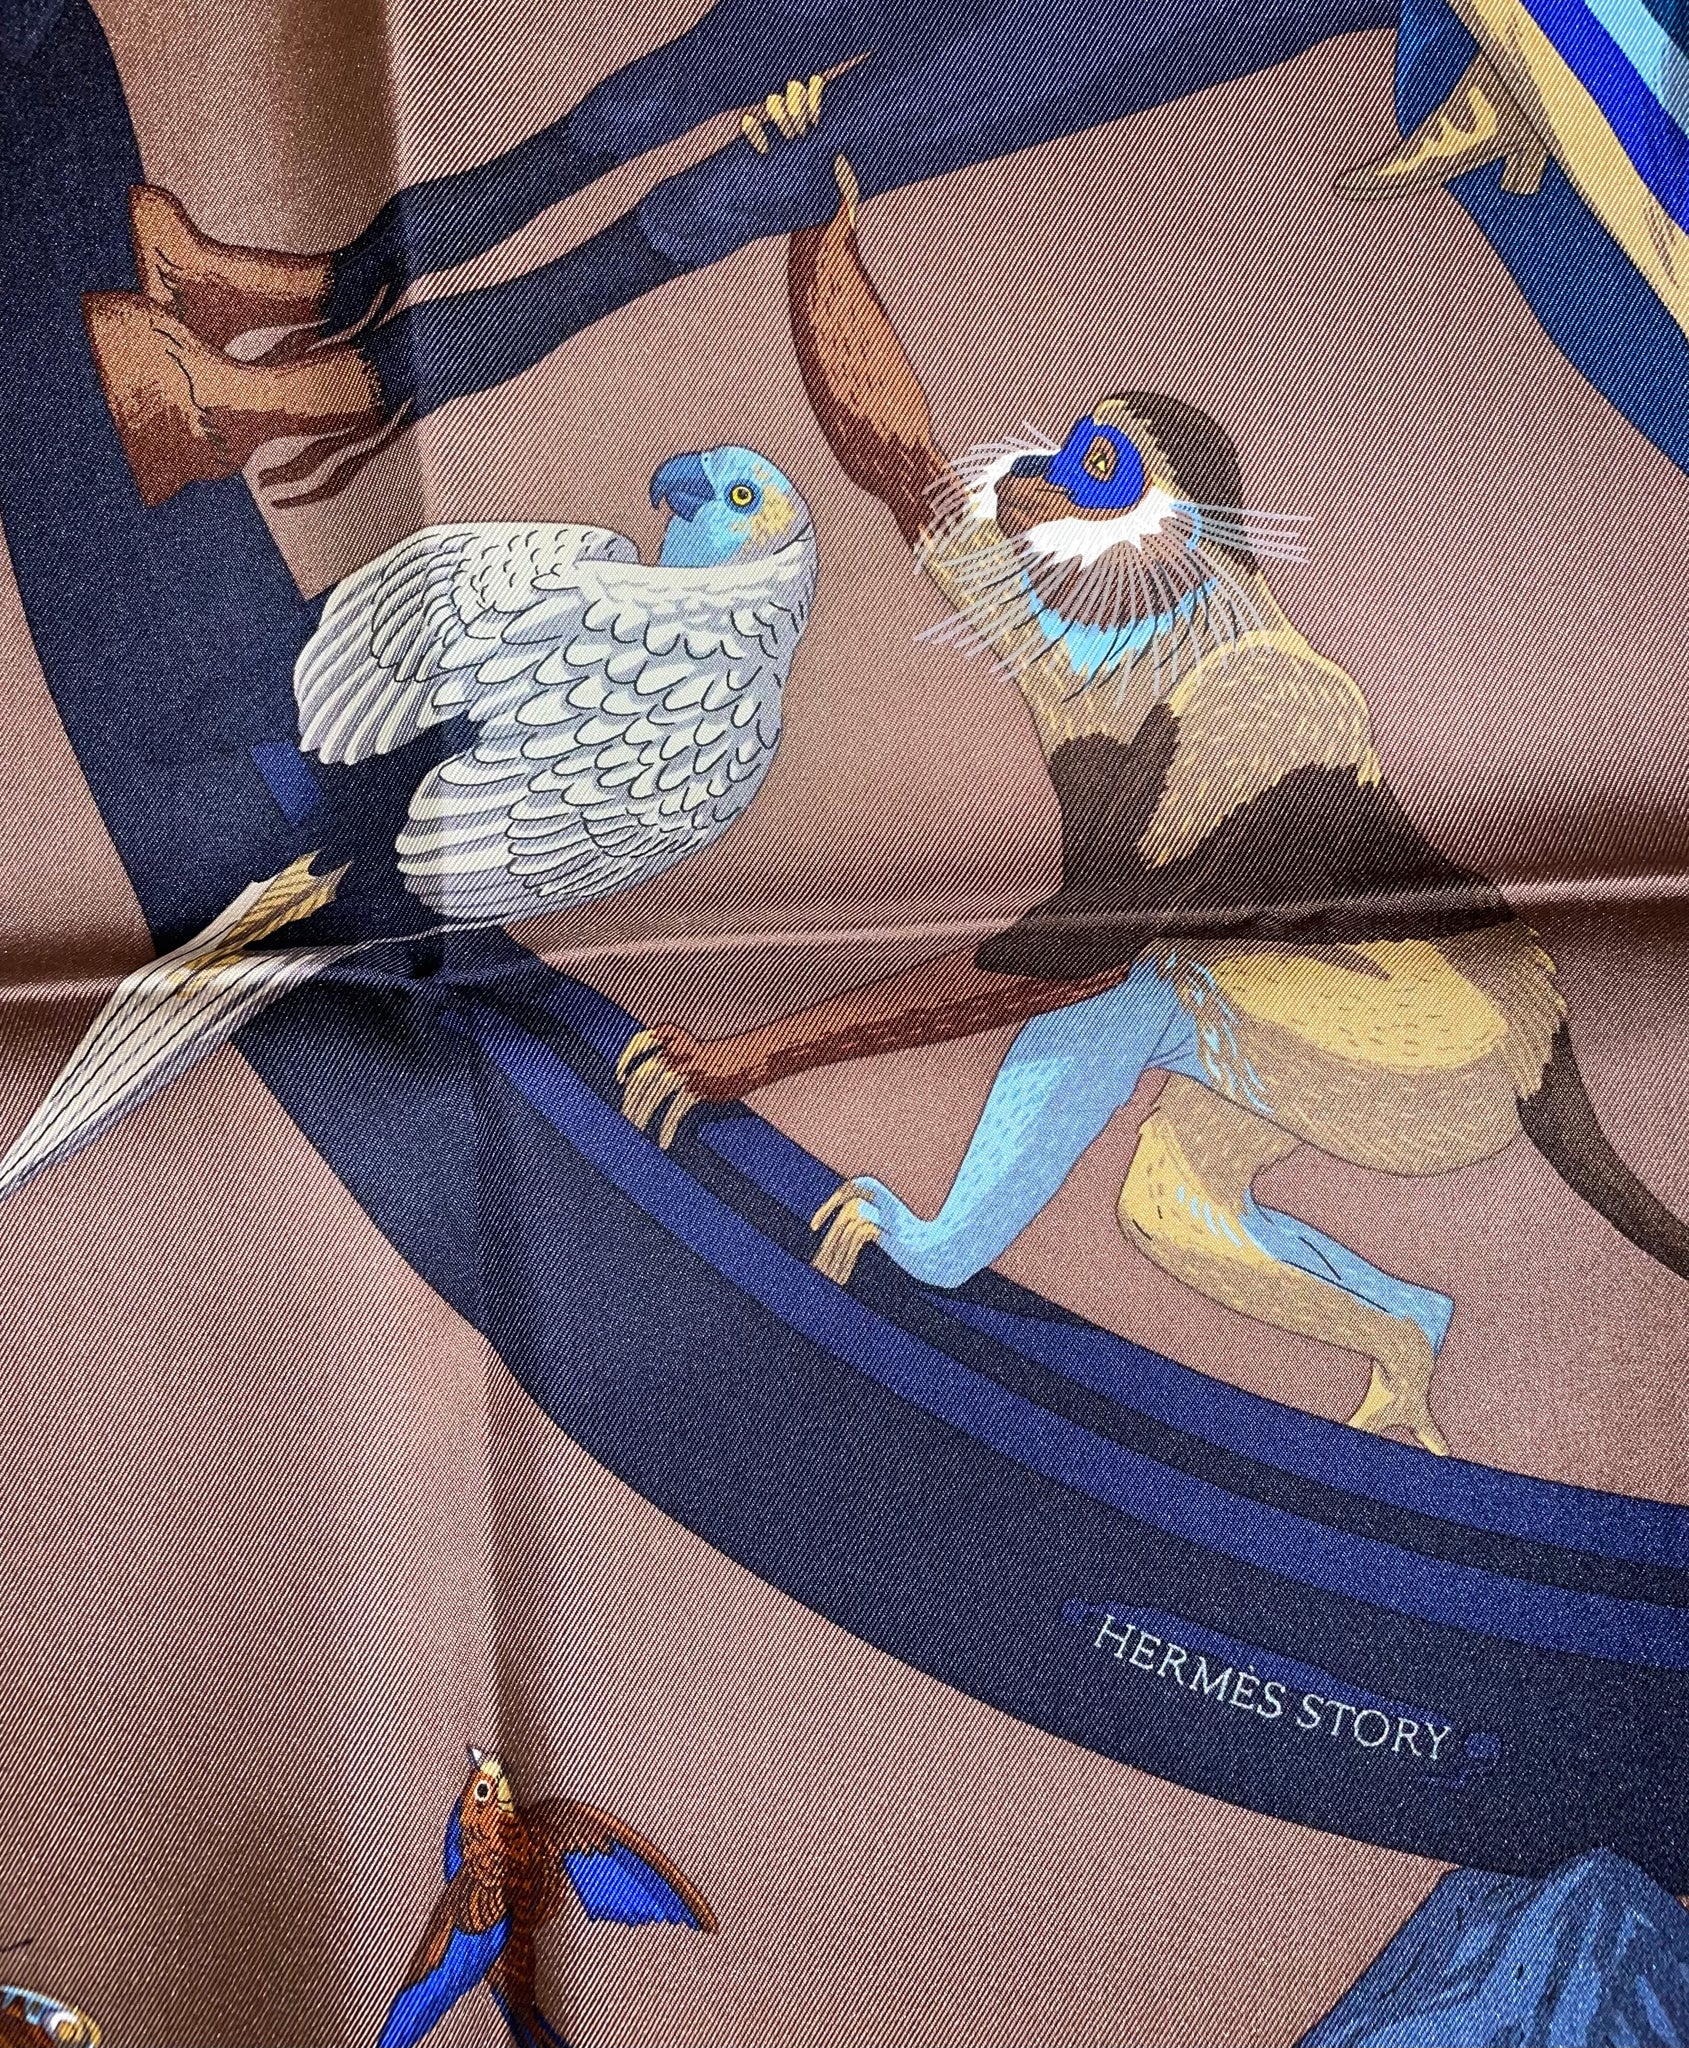 The Story of the Hermès Scarf